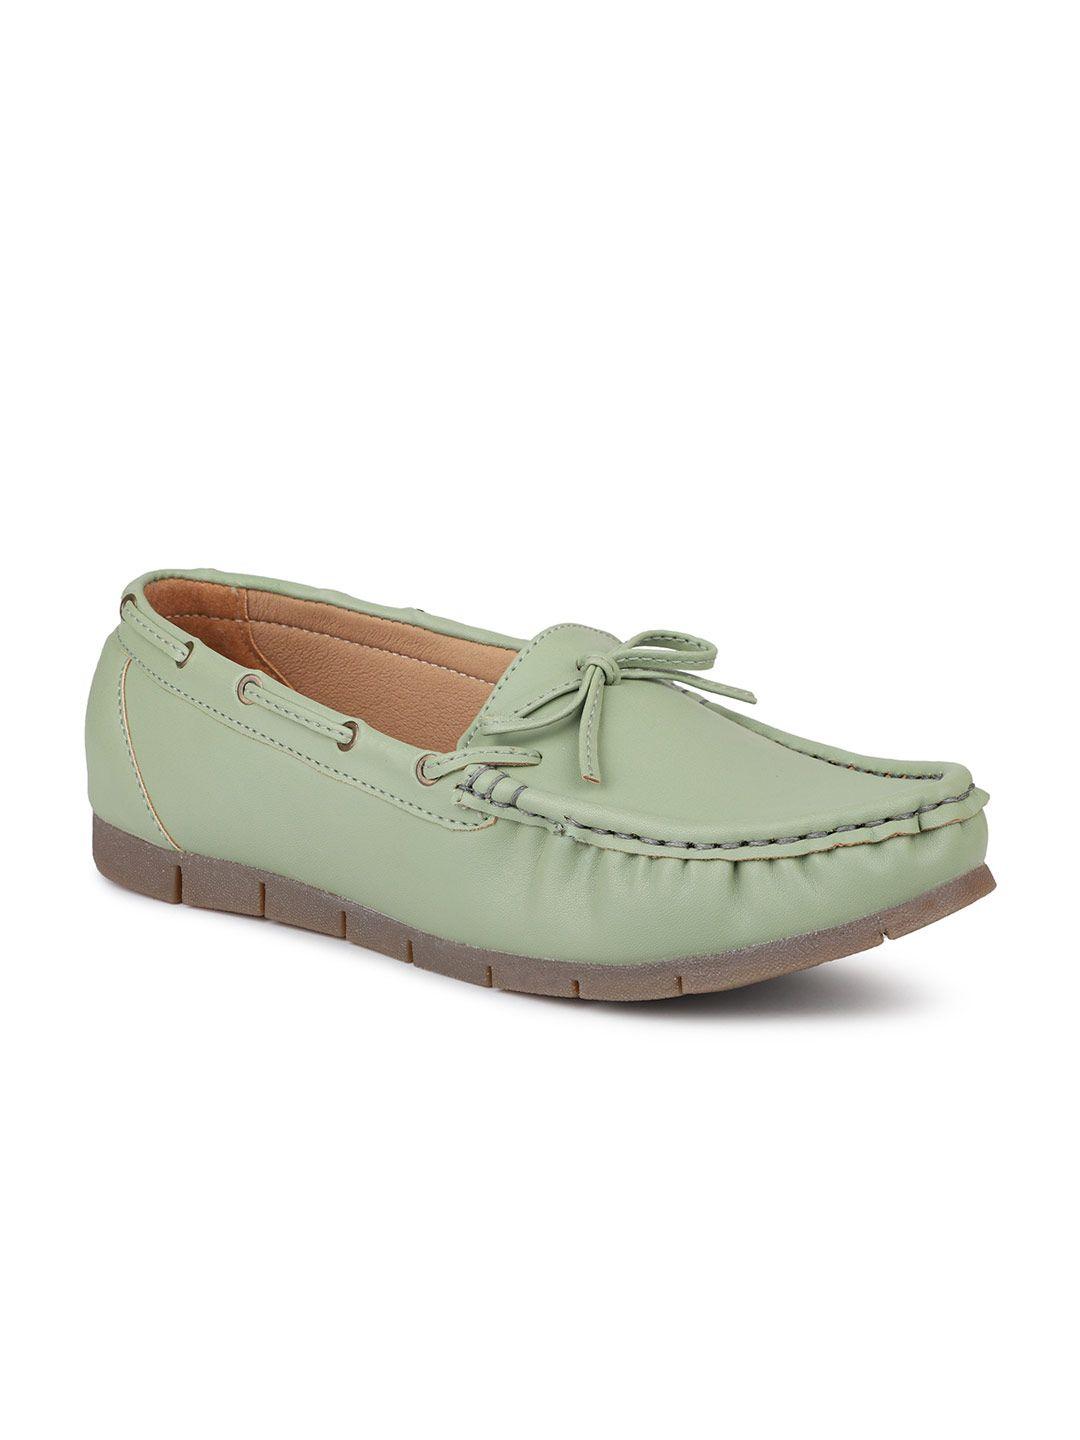 design crew women green bow embellished boat shoes